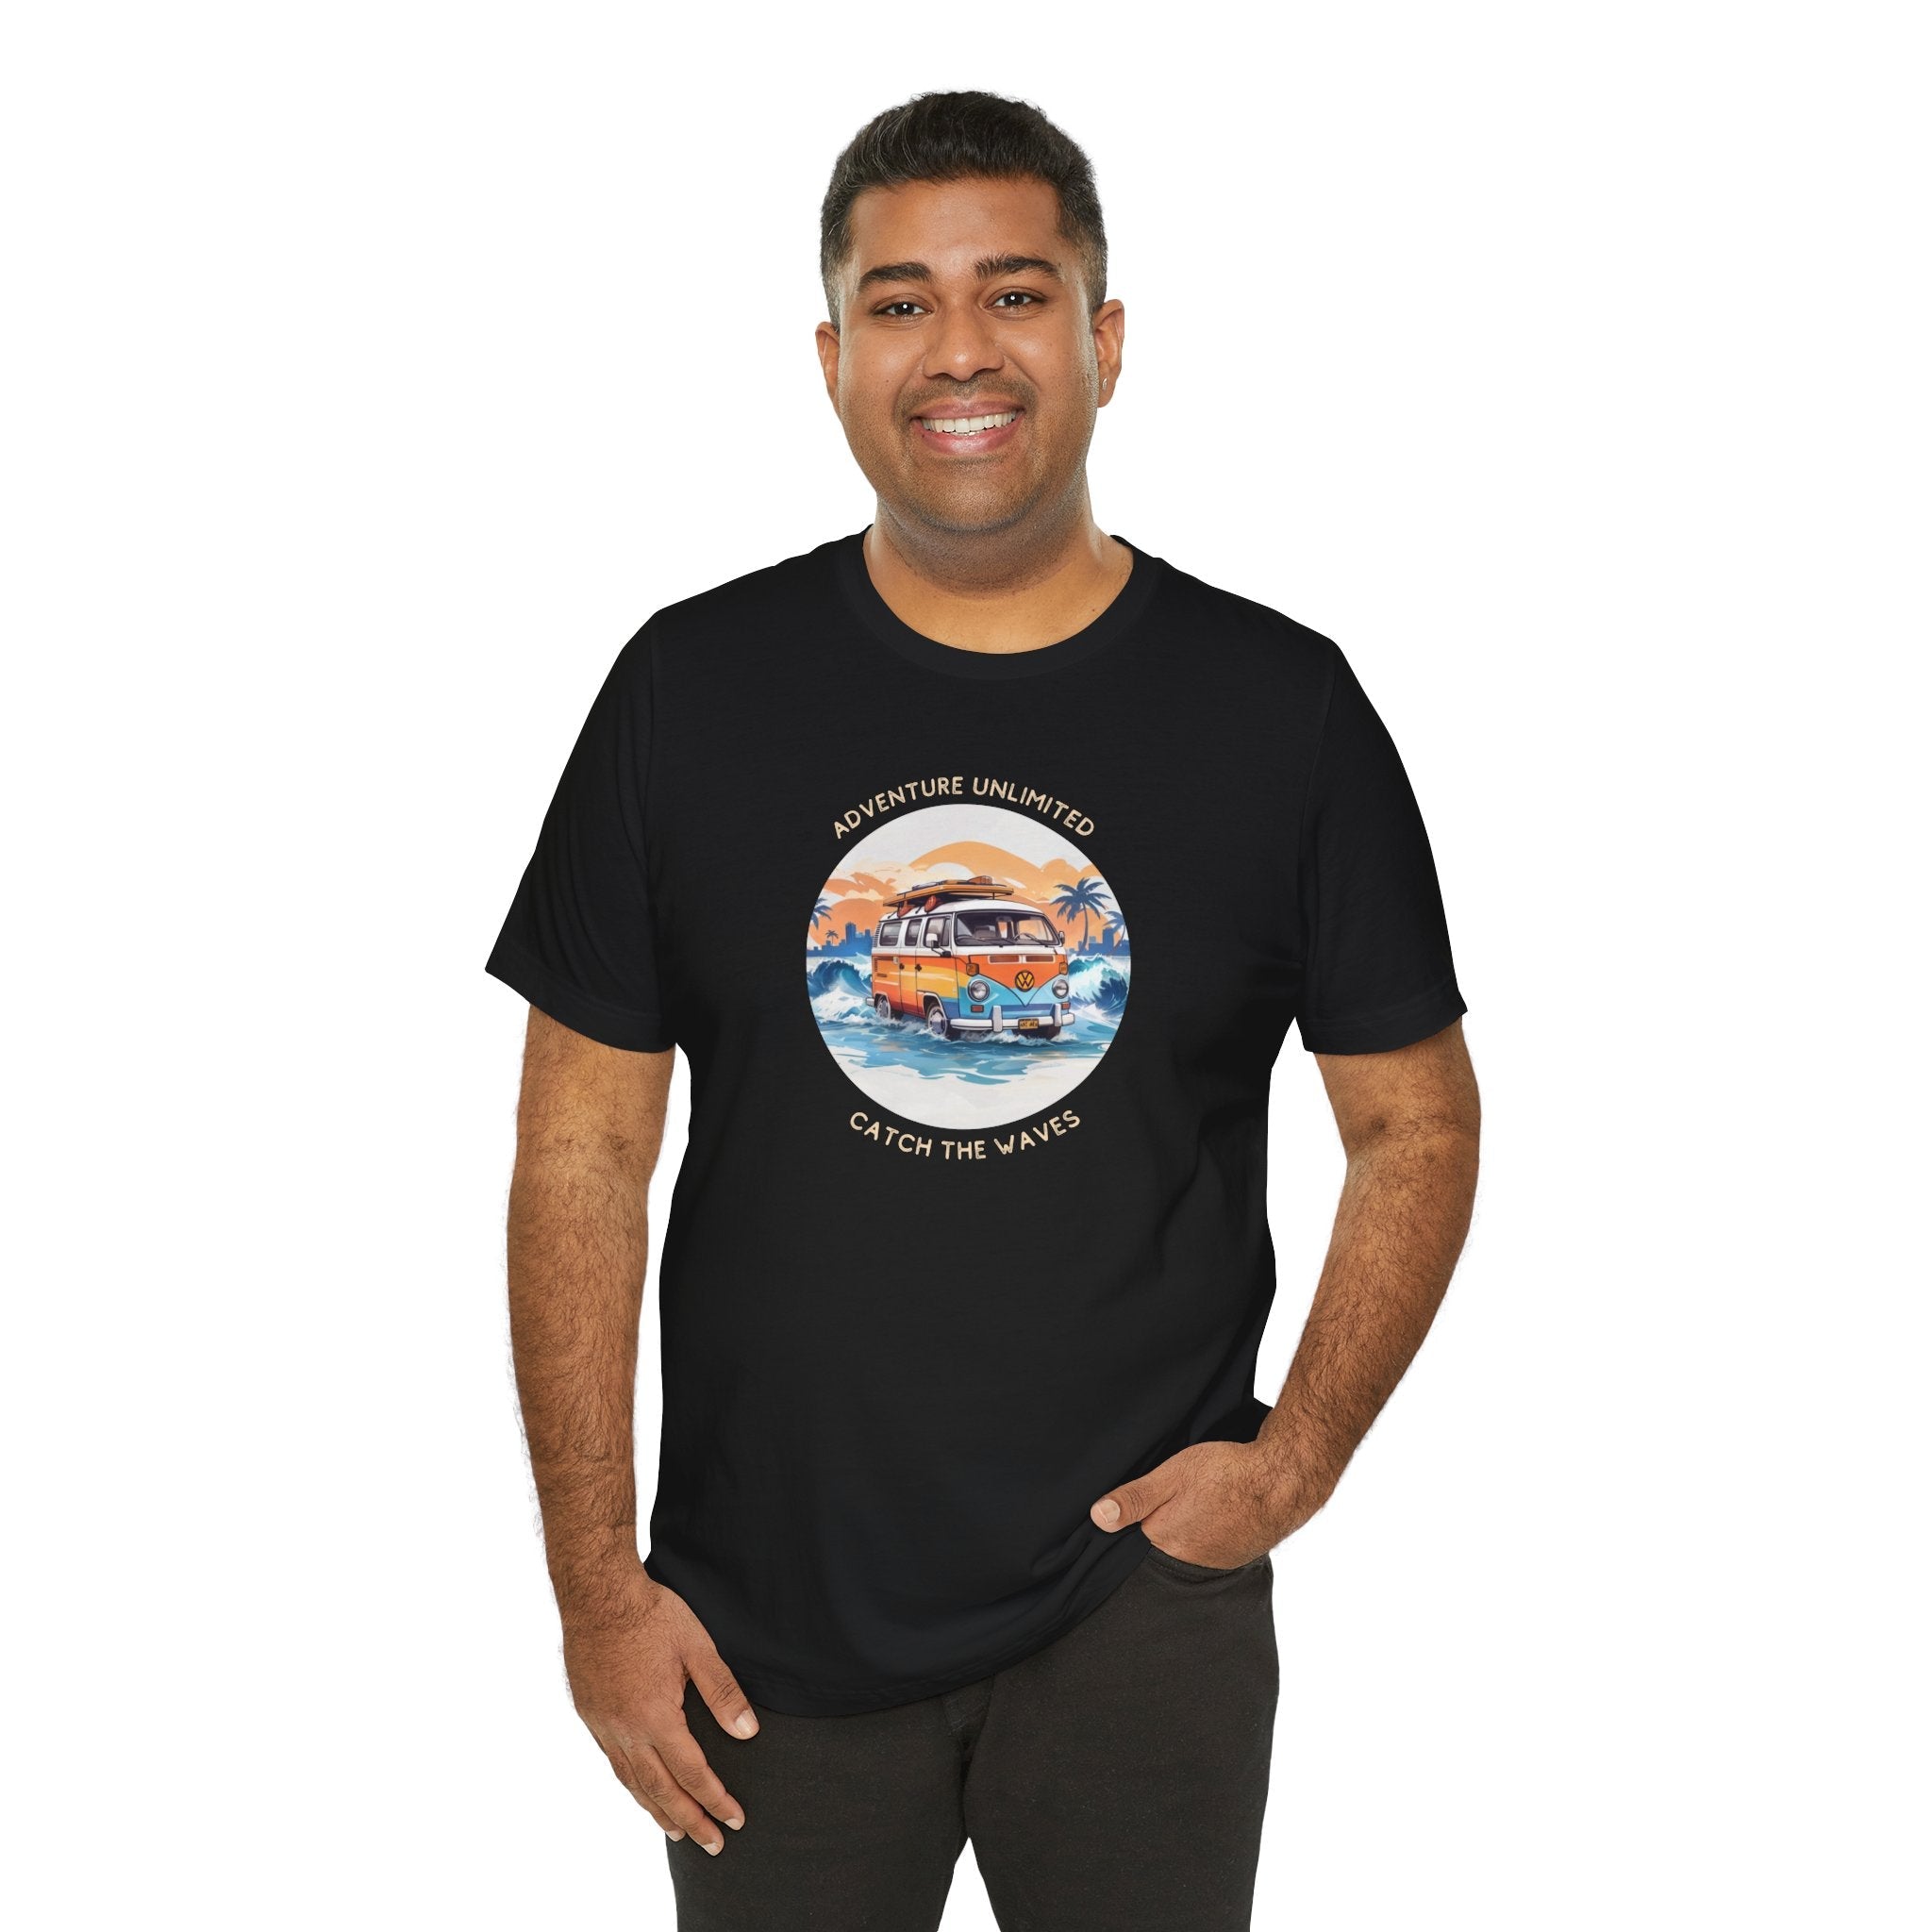 Adventure Unlimited printed black t-shirt with ’on it’ slogan, direct-to-garment item